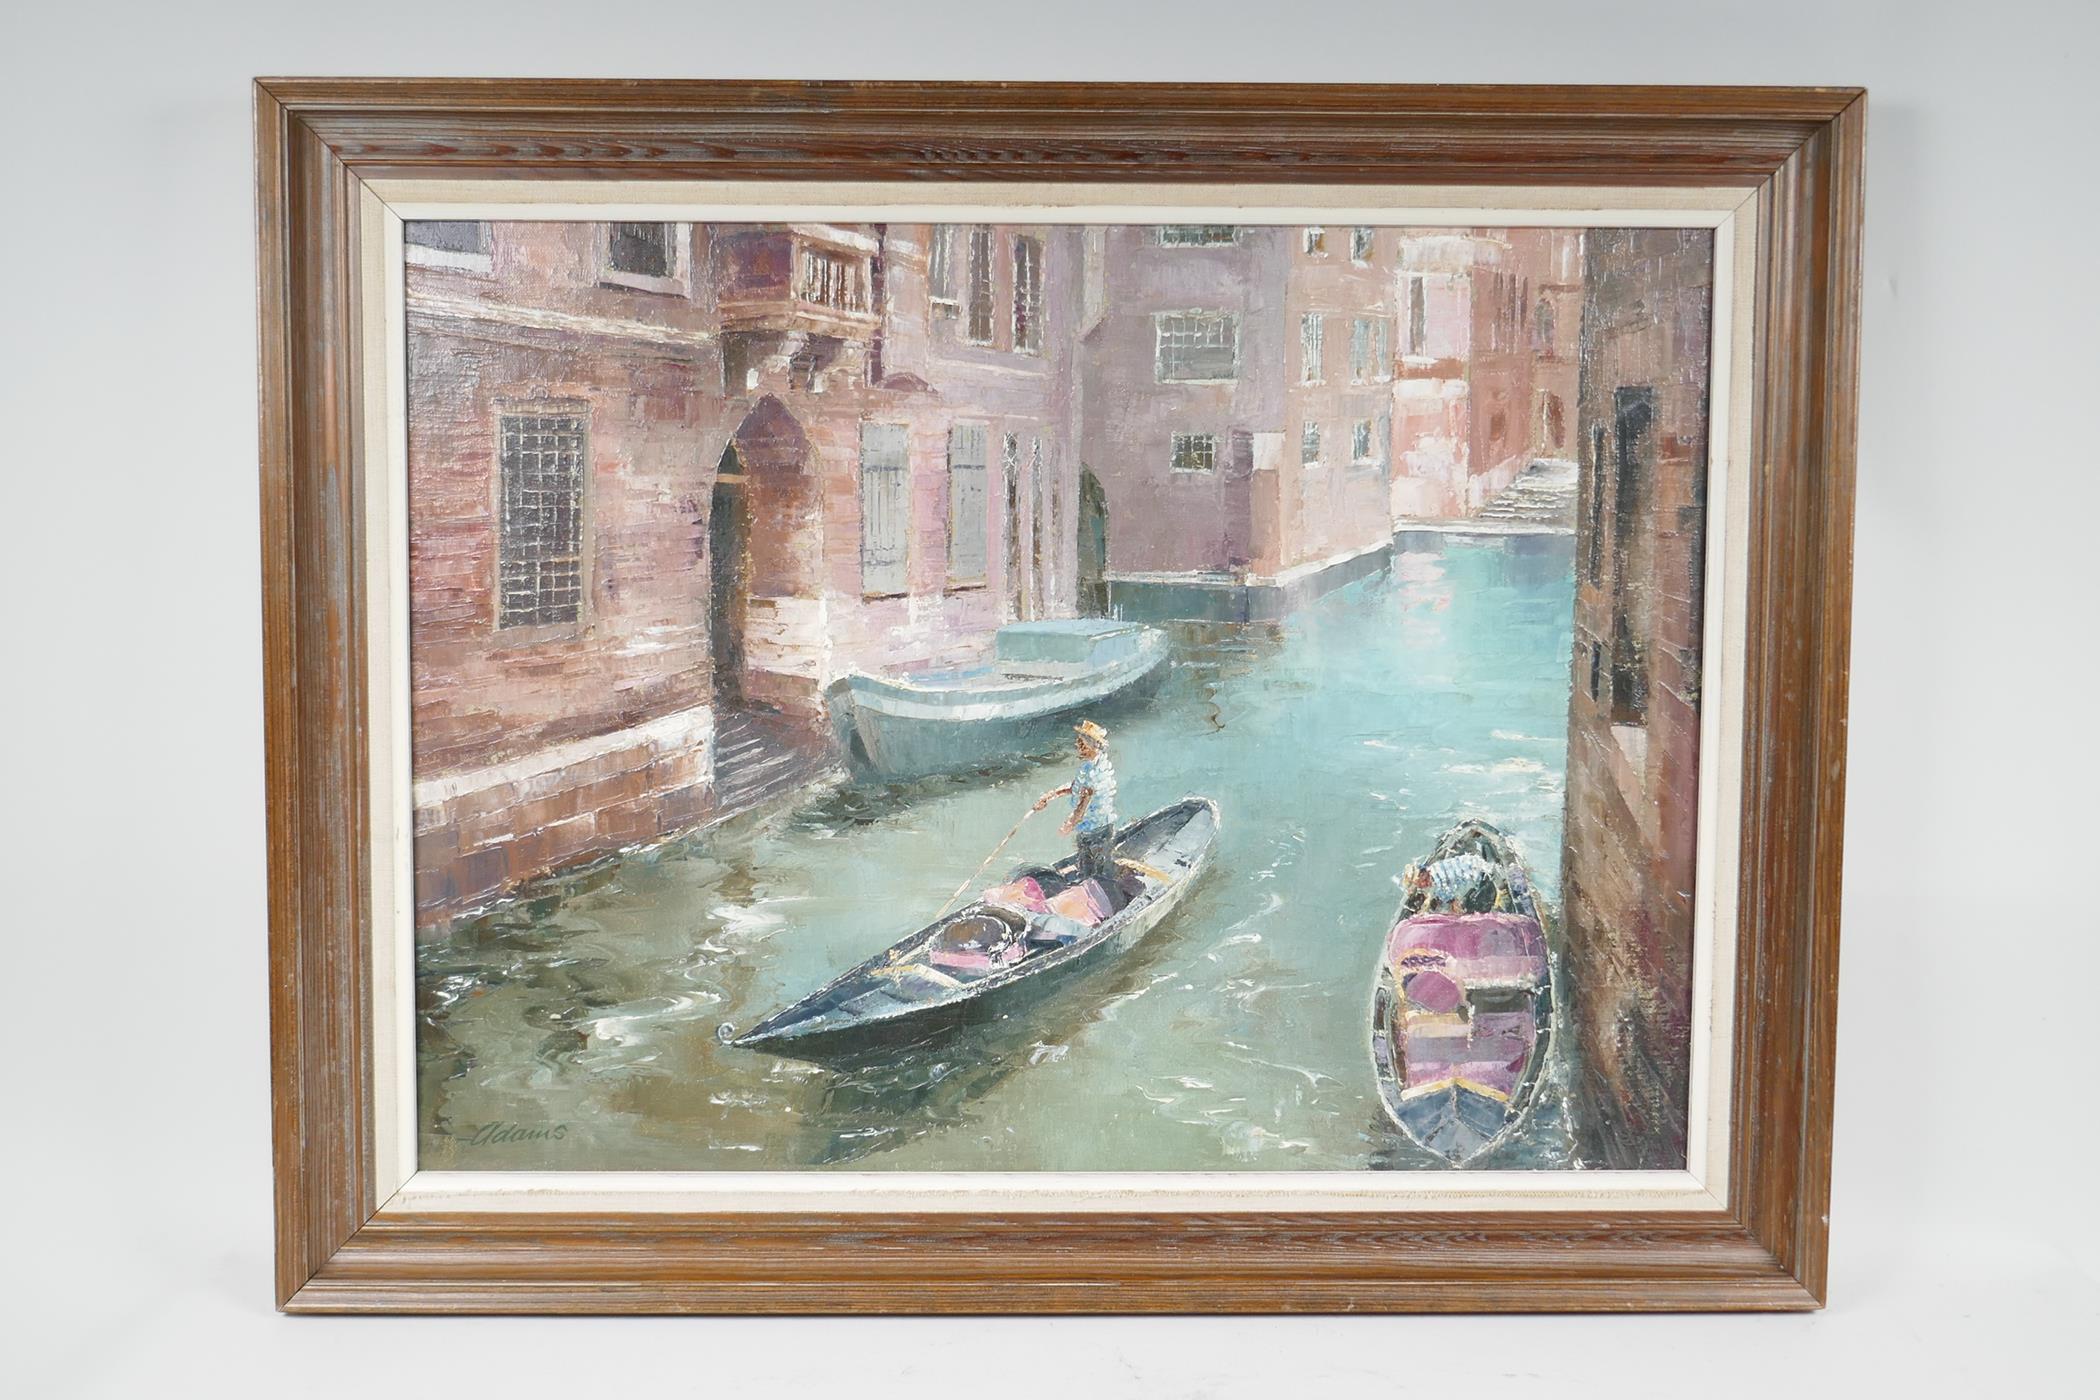 Adams, Venetian backwater canal scene with a gondola, oil on canvas, 22" x 16" - Image 3 of 5